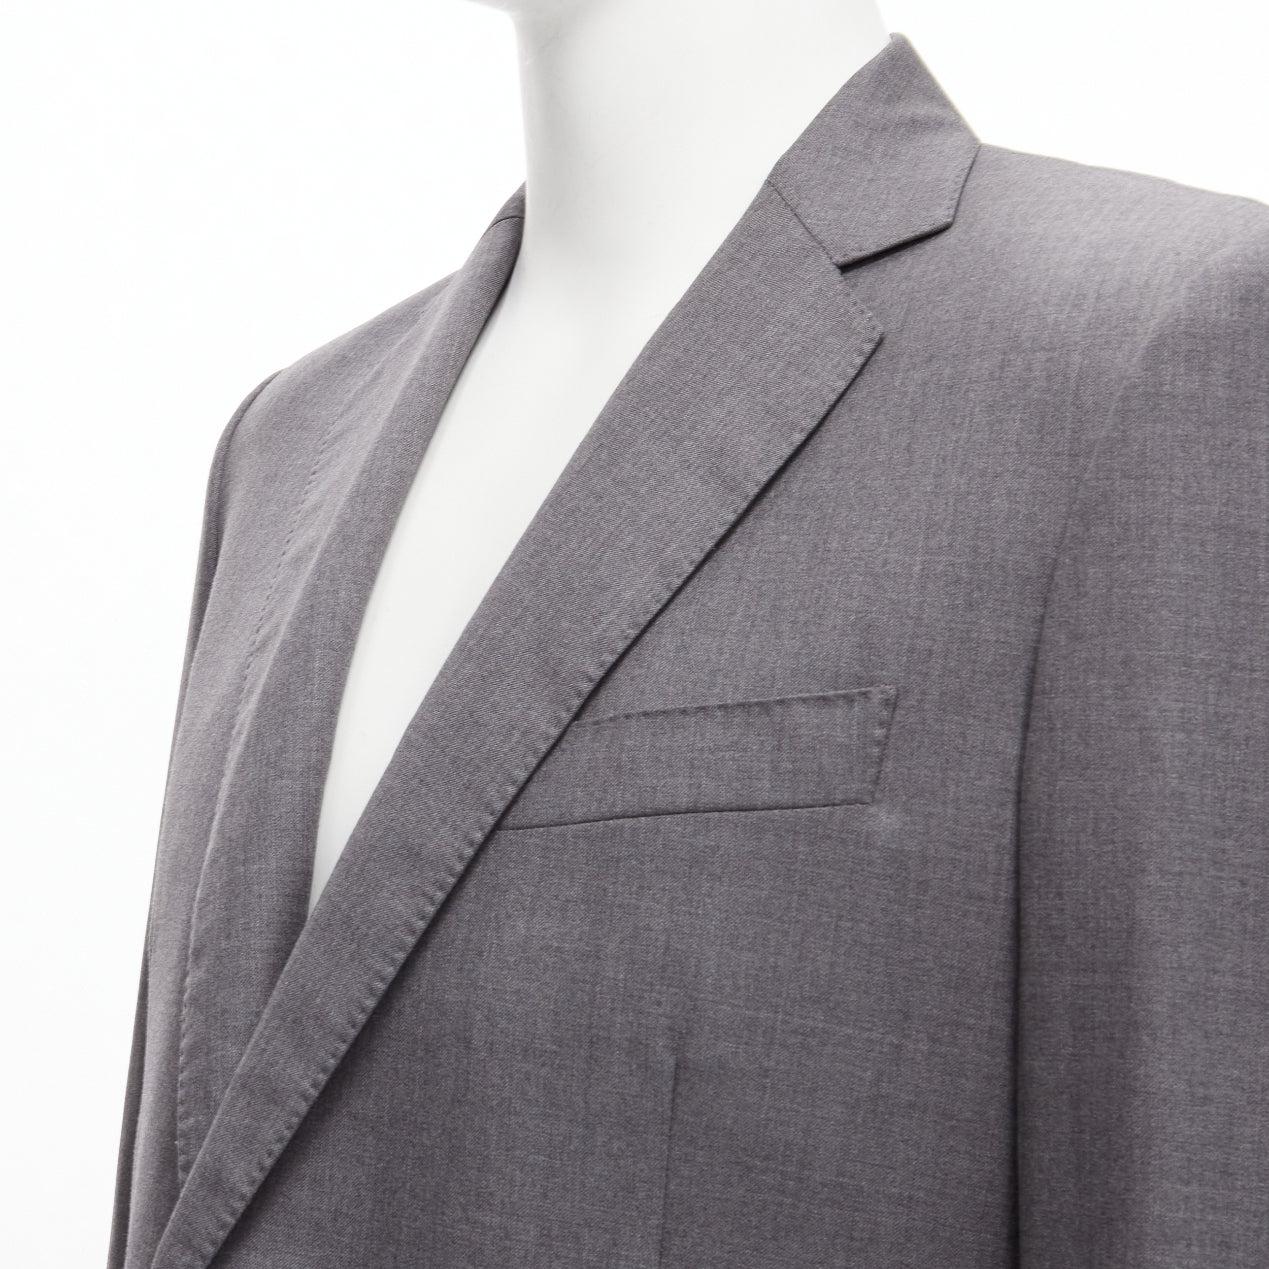 KILGOUR Saville Row grey virgin wool pink lining blazer jacket UK38 M
Reference: YNWG/A00186
Brand: Kilgor
Collection: Saville Row
Material: Virgin Wool
Color: Grey, Pink
Pattern: Solid
Closure: Button
Lining: Pink Fabric
Extra Details: Beautiful